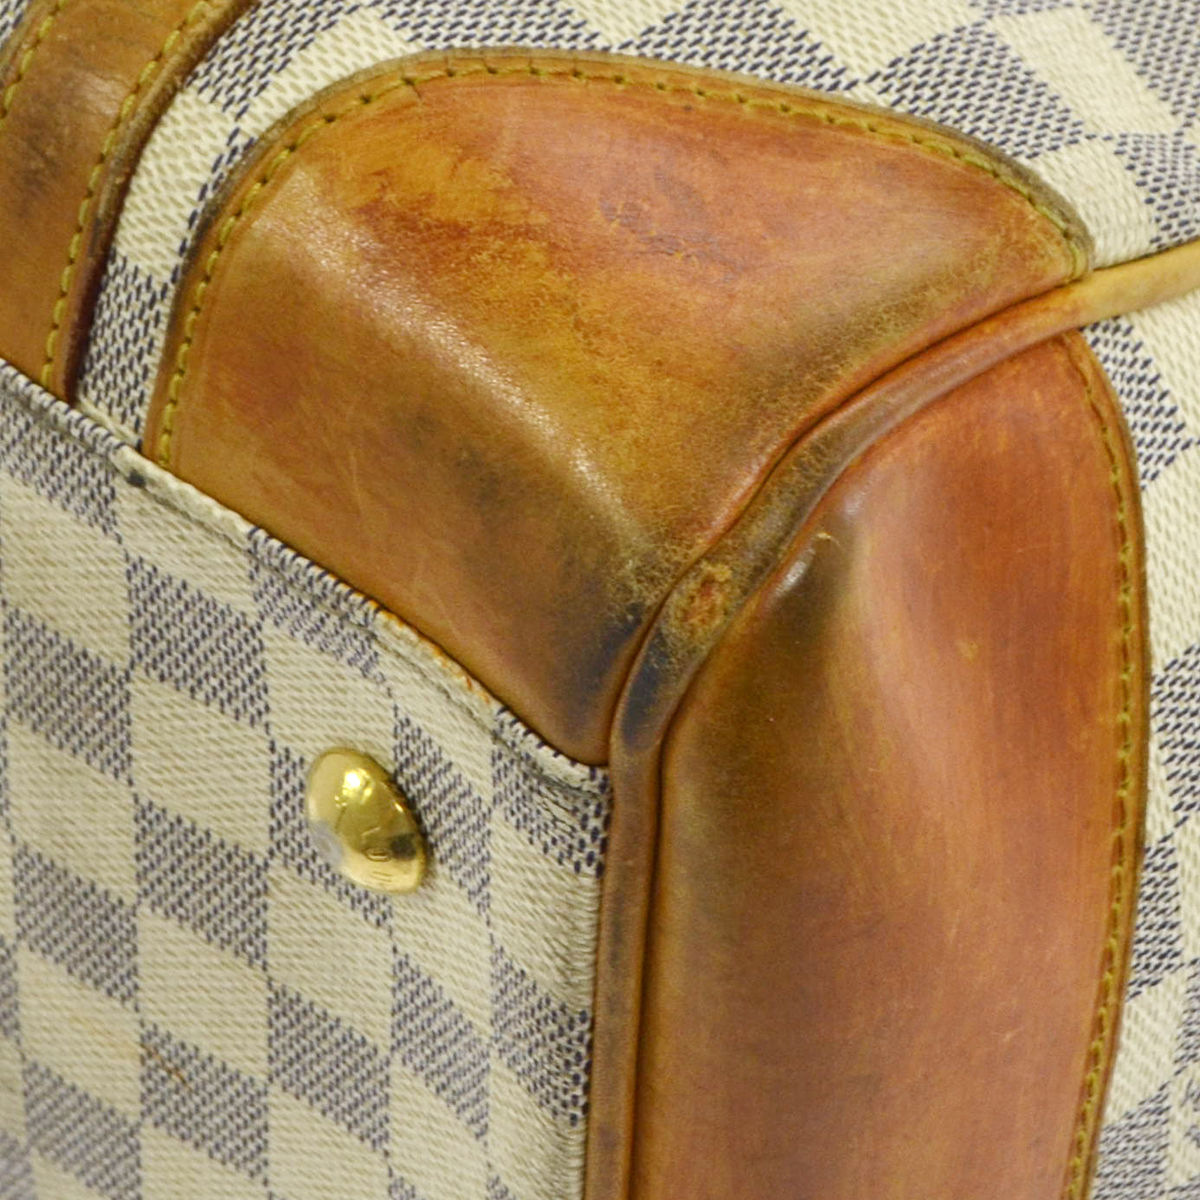 Louis Vuitton - with Vachetta leather trim, how to clean it and